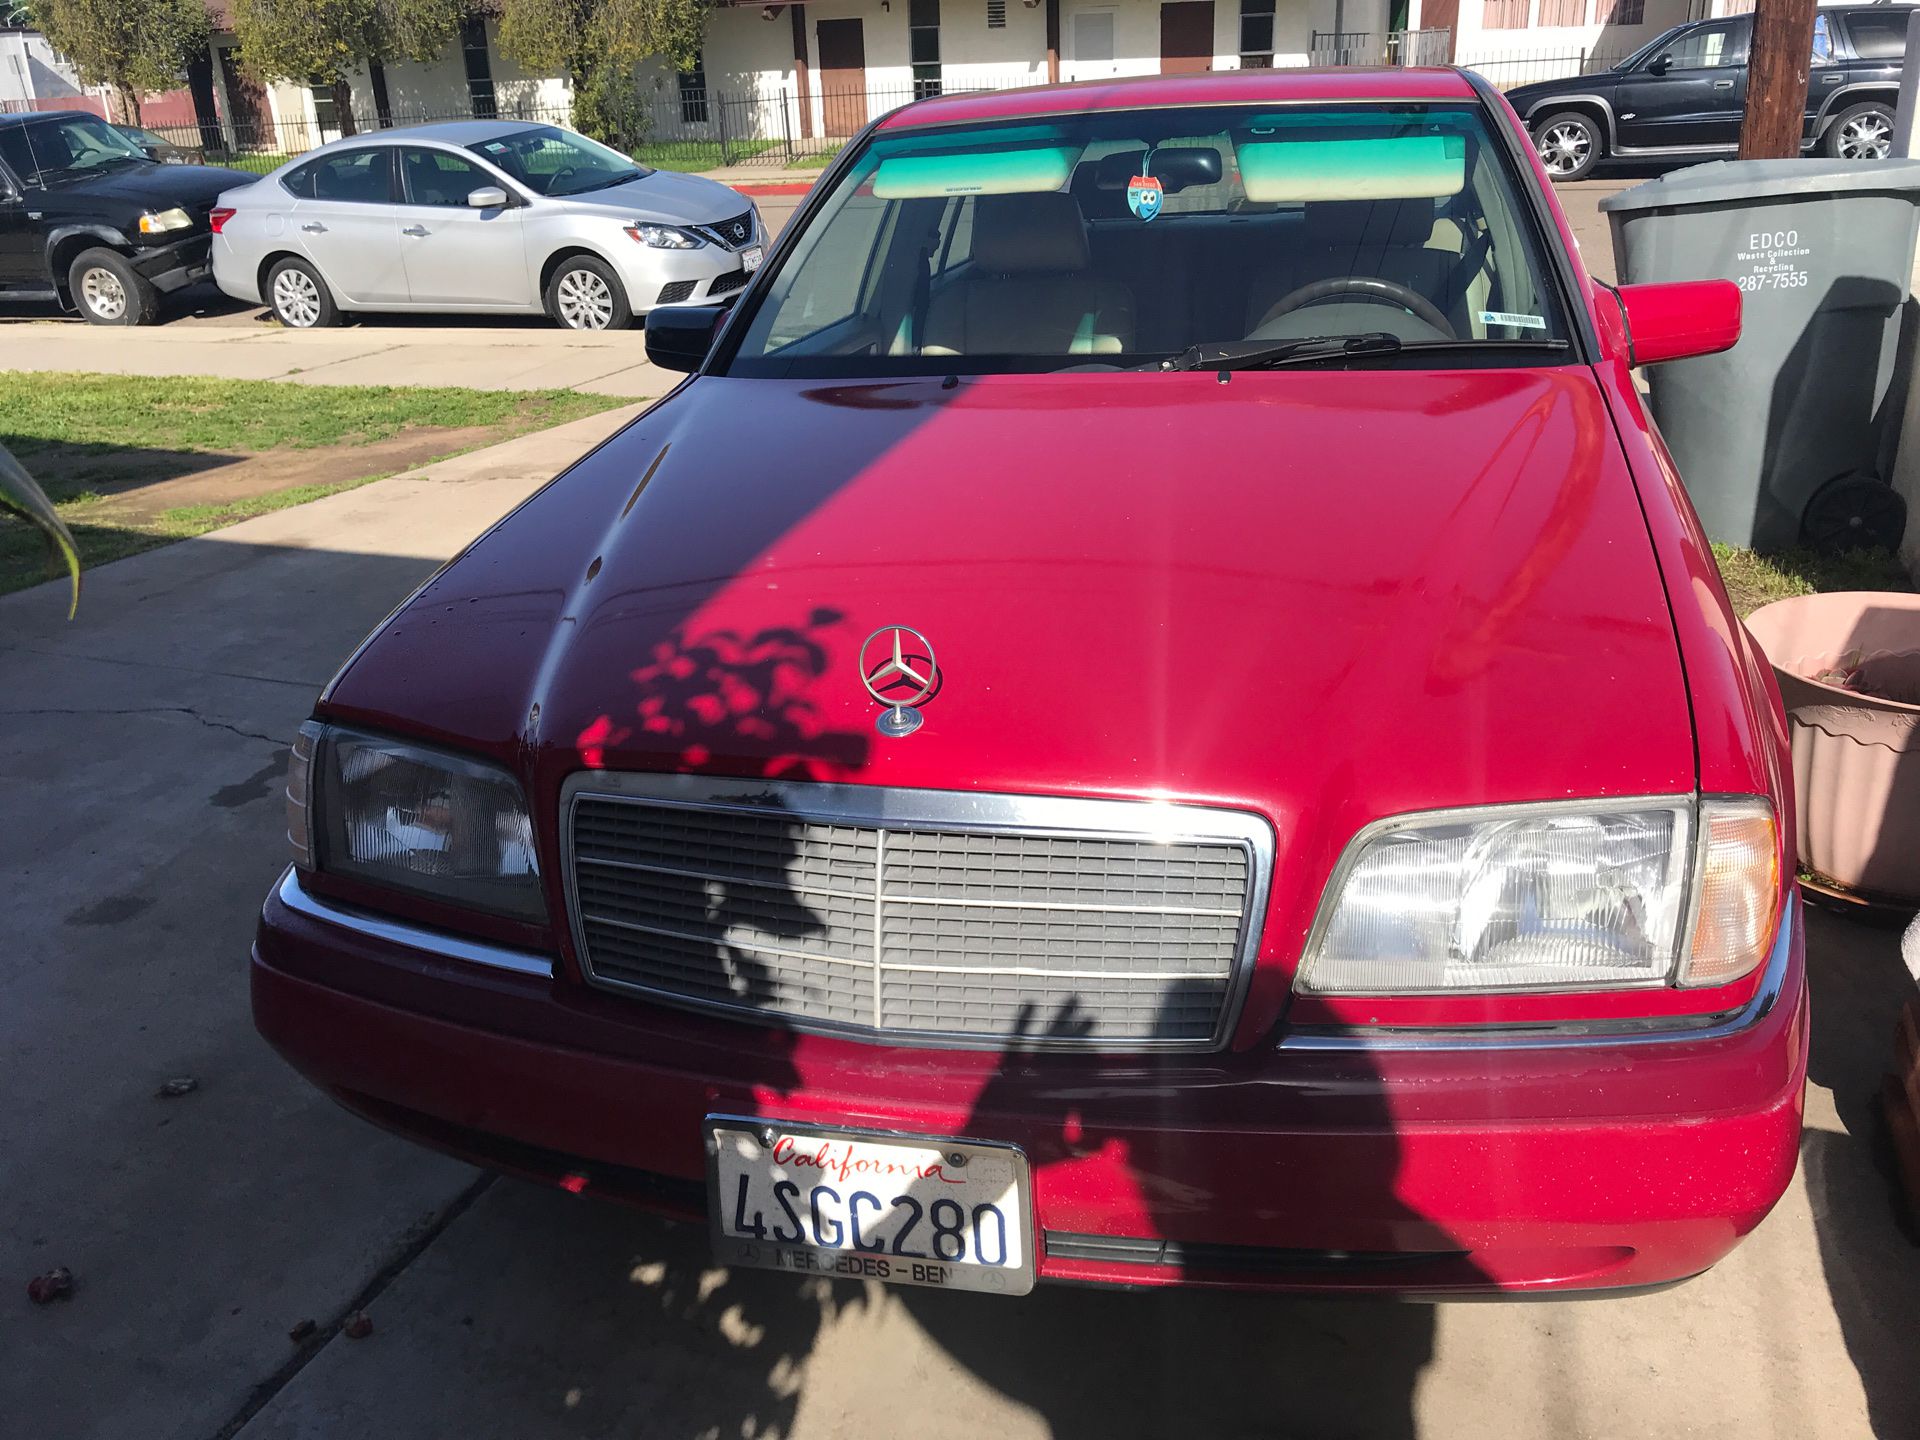 Mercedes Benz for parts 1996 C280 parting out or sale all it will start but had oil leak best offer will take it